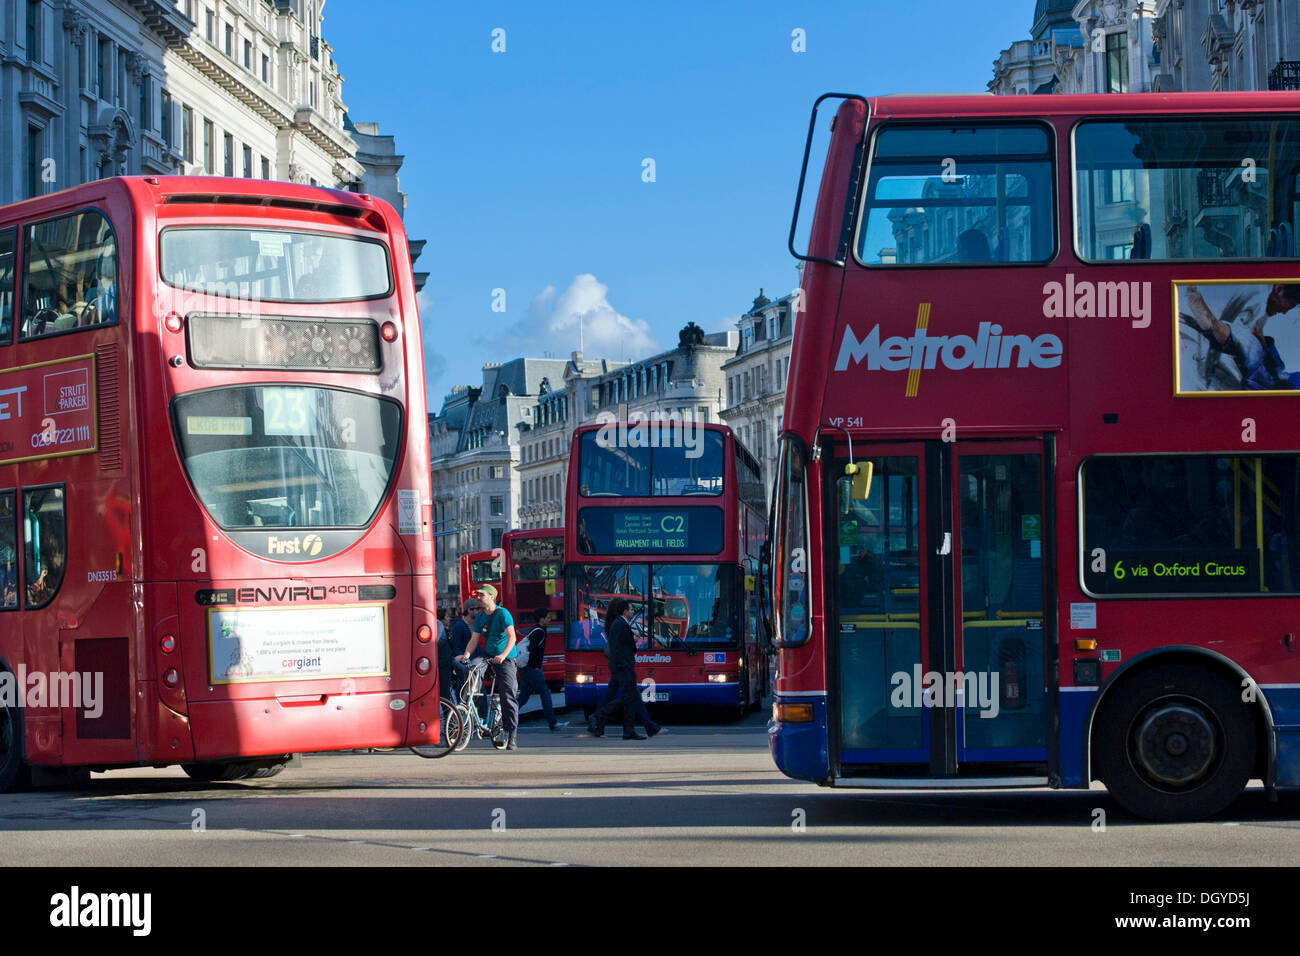 Double decker buses in Oxford Circus, London, England, United Kingdom, Europe Stock Photo